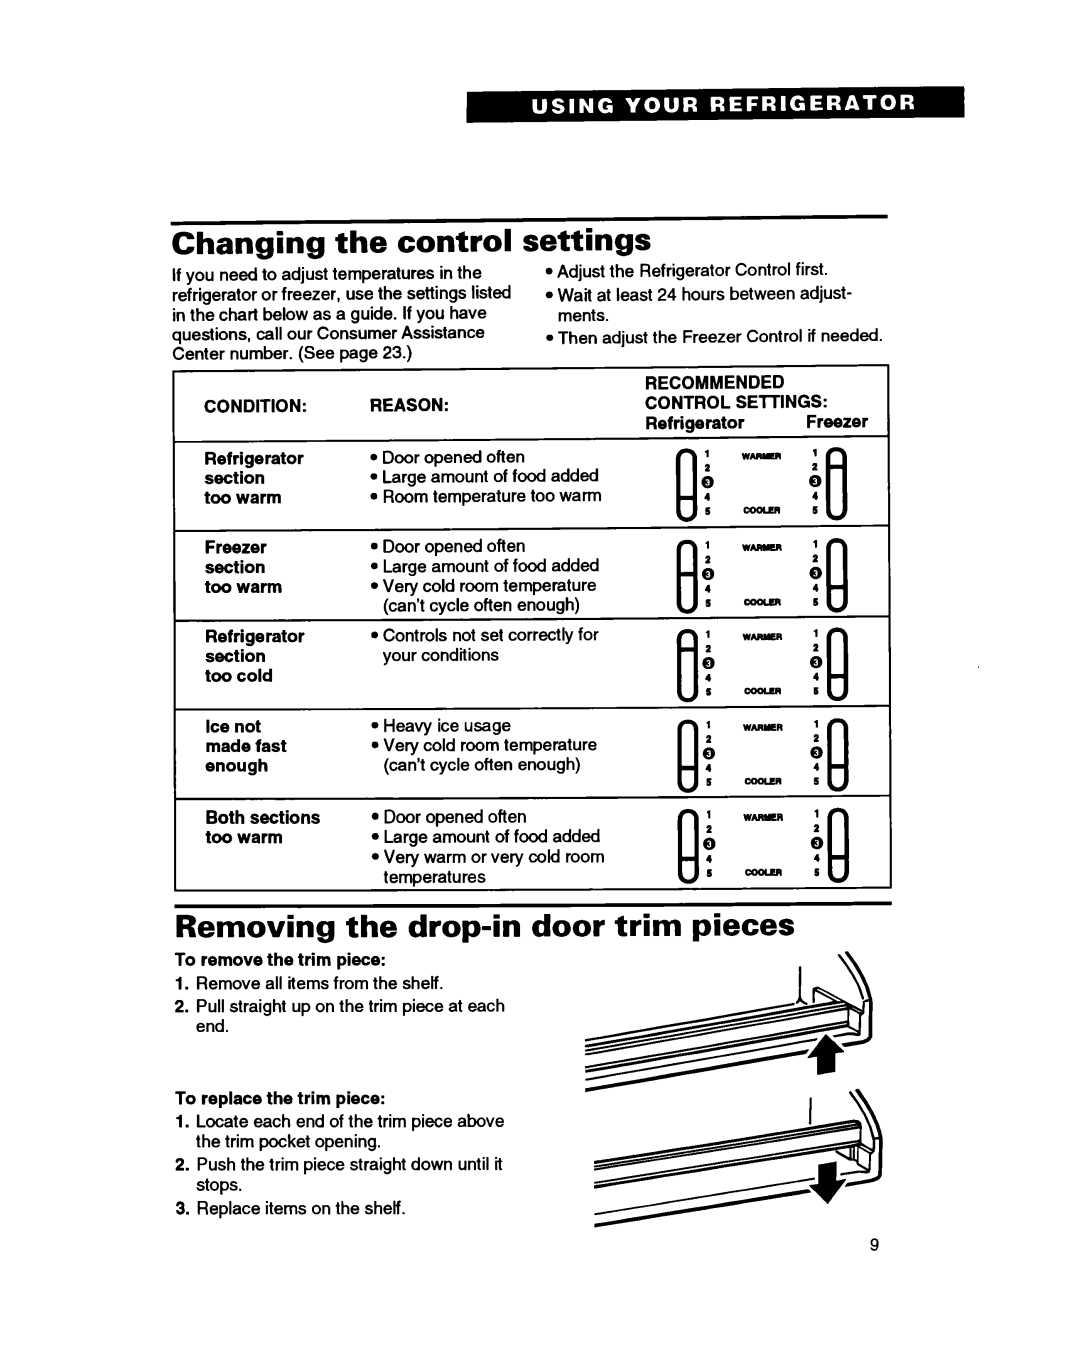 Whirlpool RT16VK, RTIGDK Changing the control, settings, Removing the drop-in, door trim pieces, Condition, Reason, li 